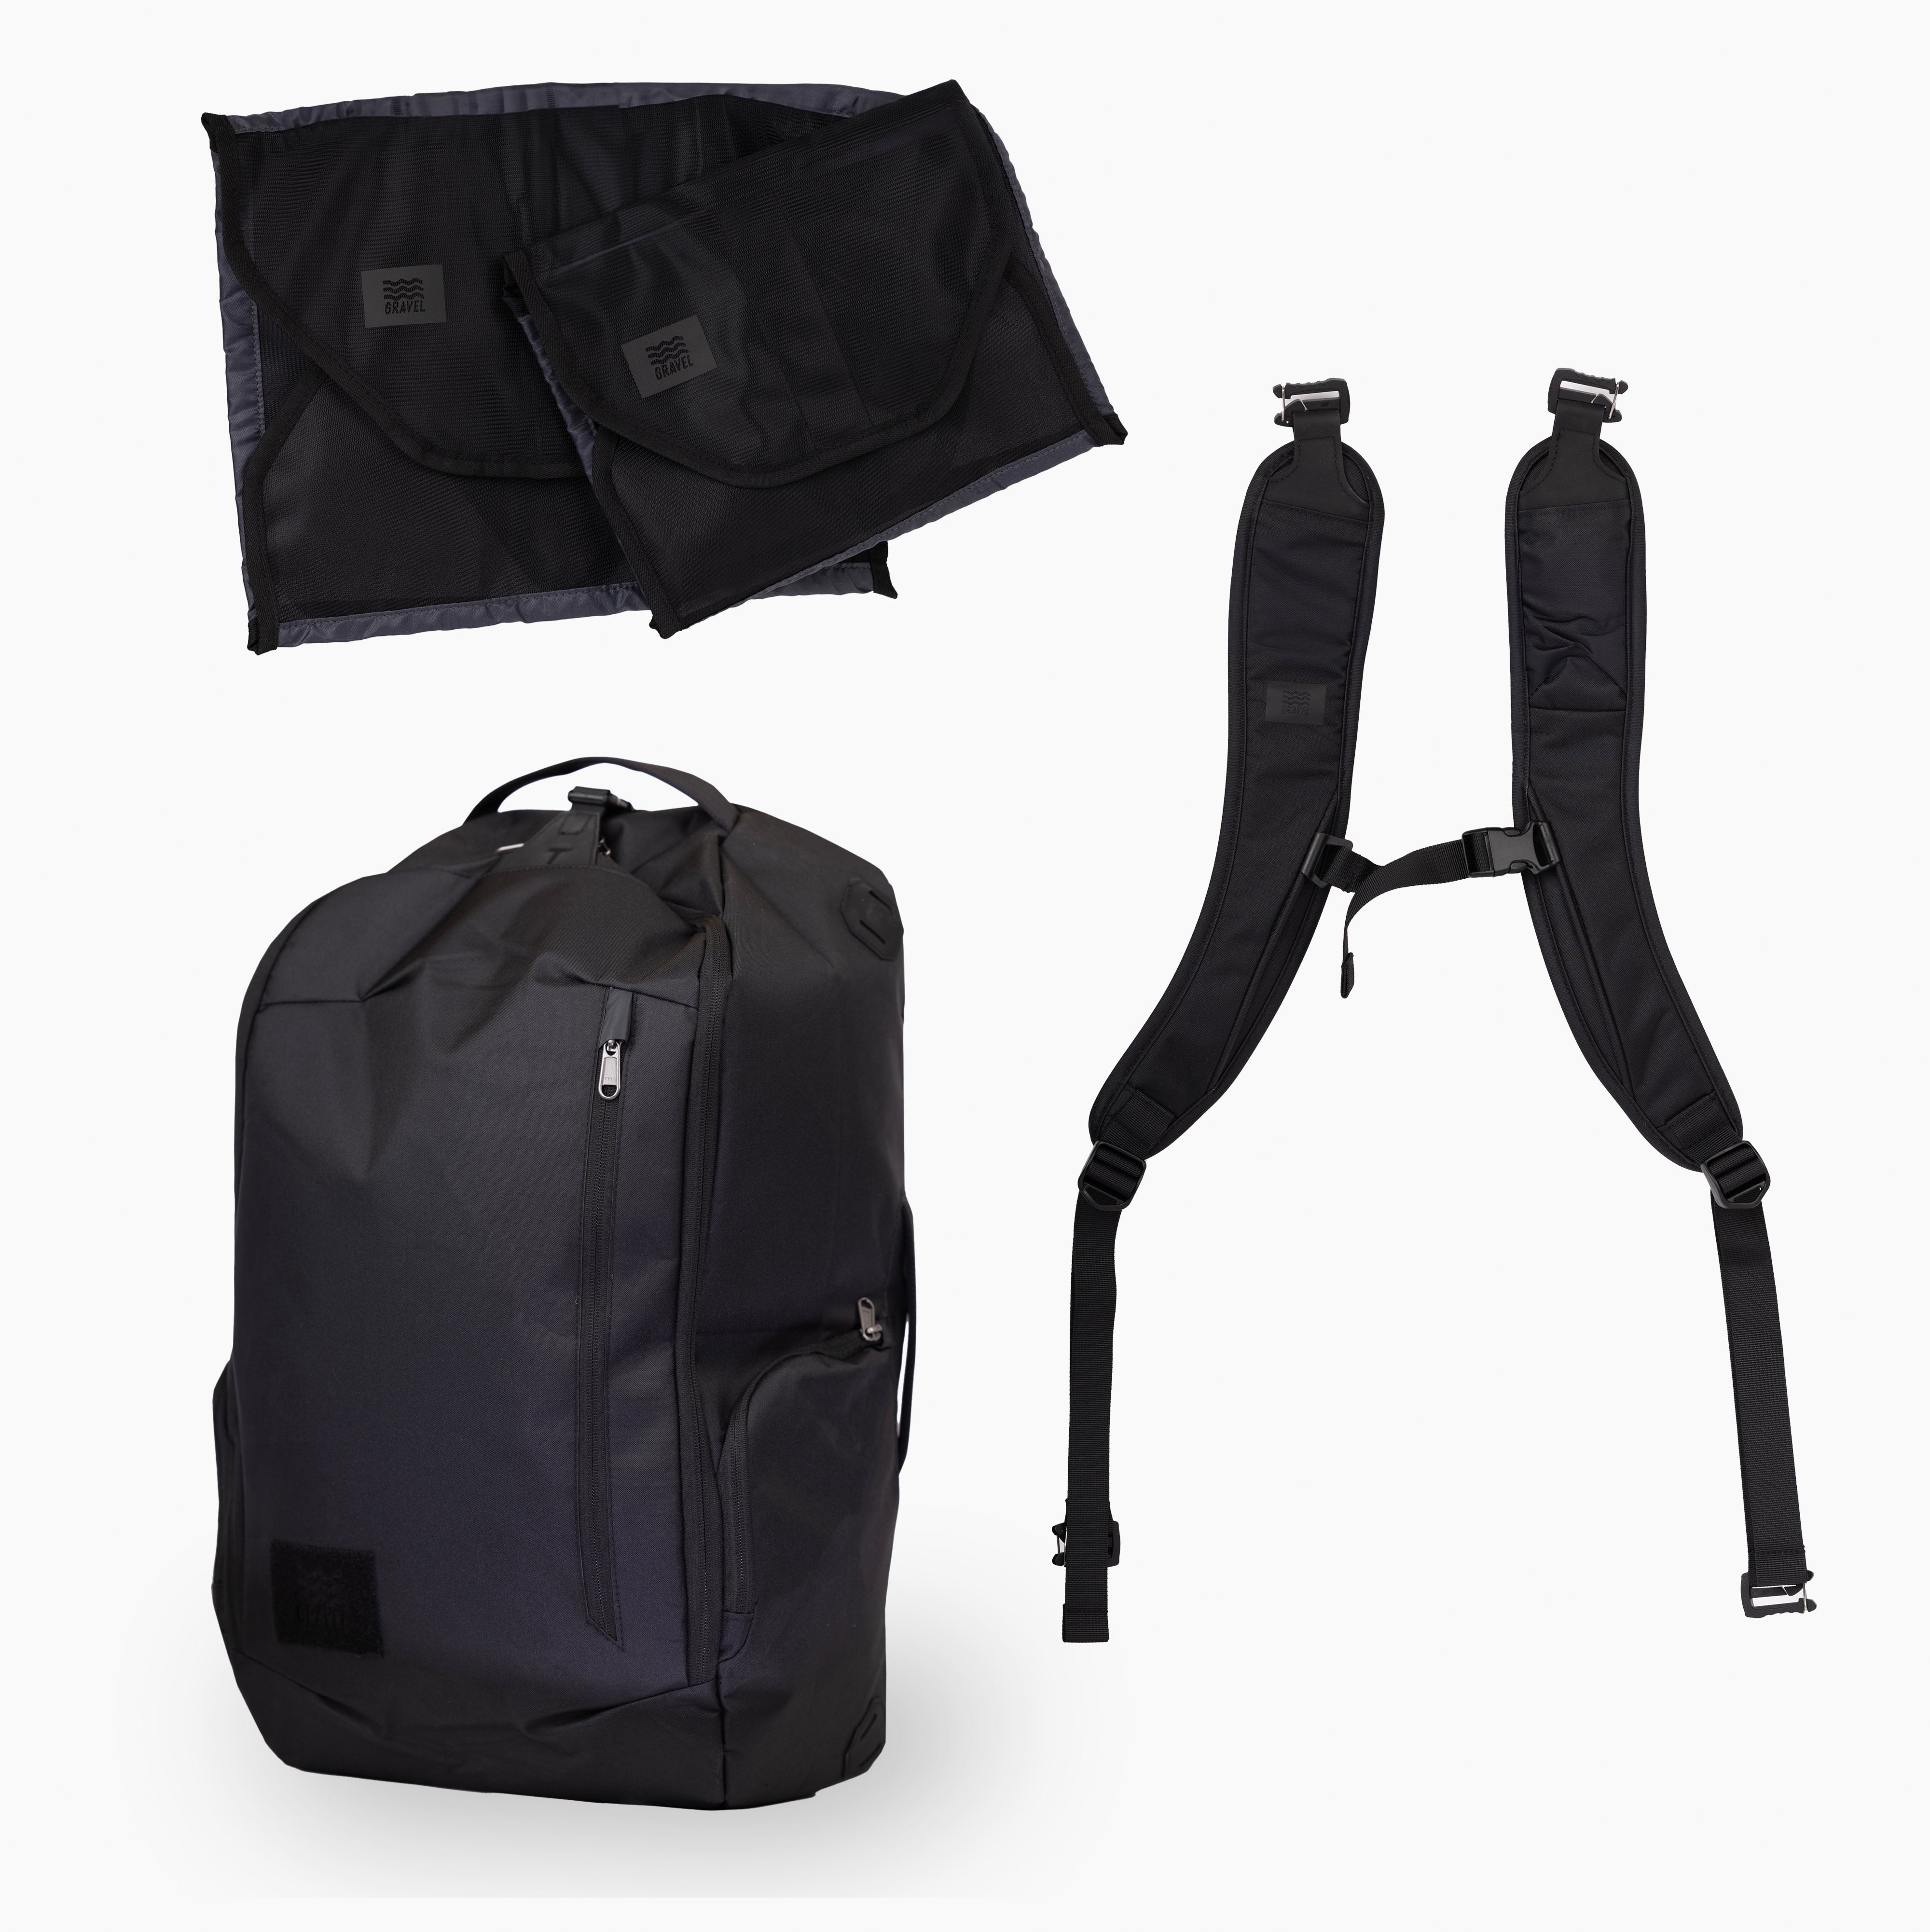 SET | Duffle Bag, Backpack Straps, & Packing Cubes